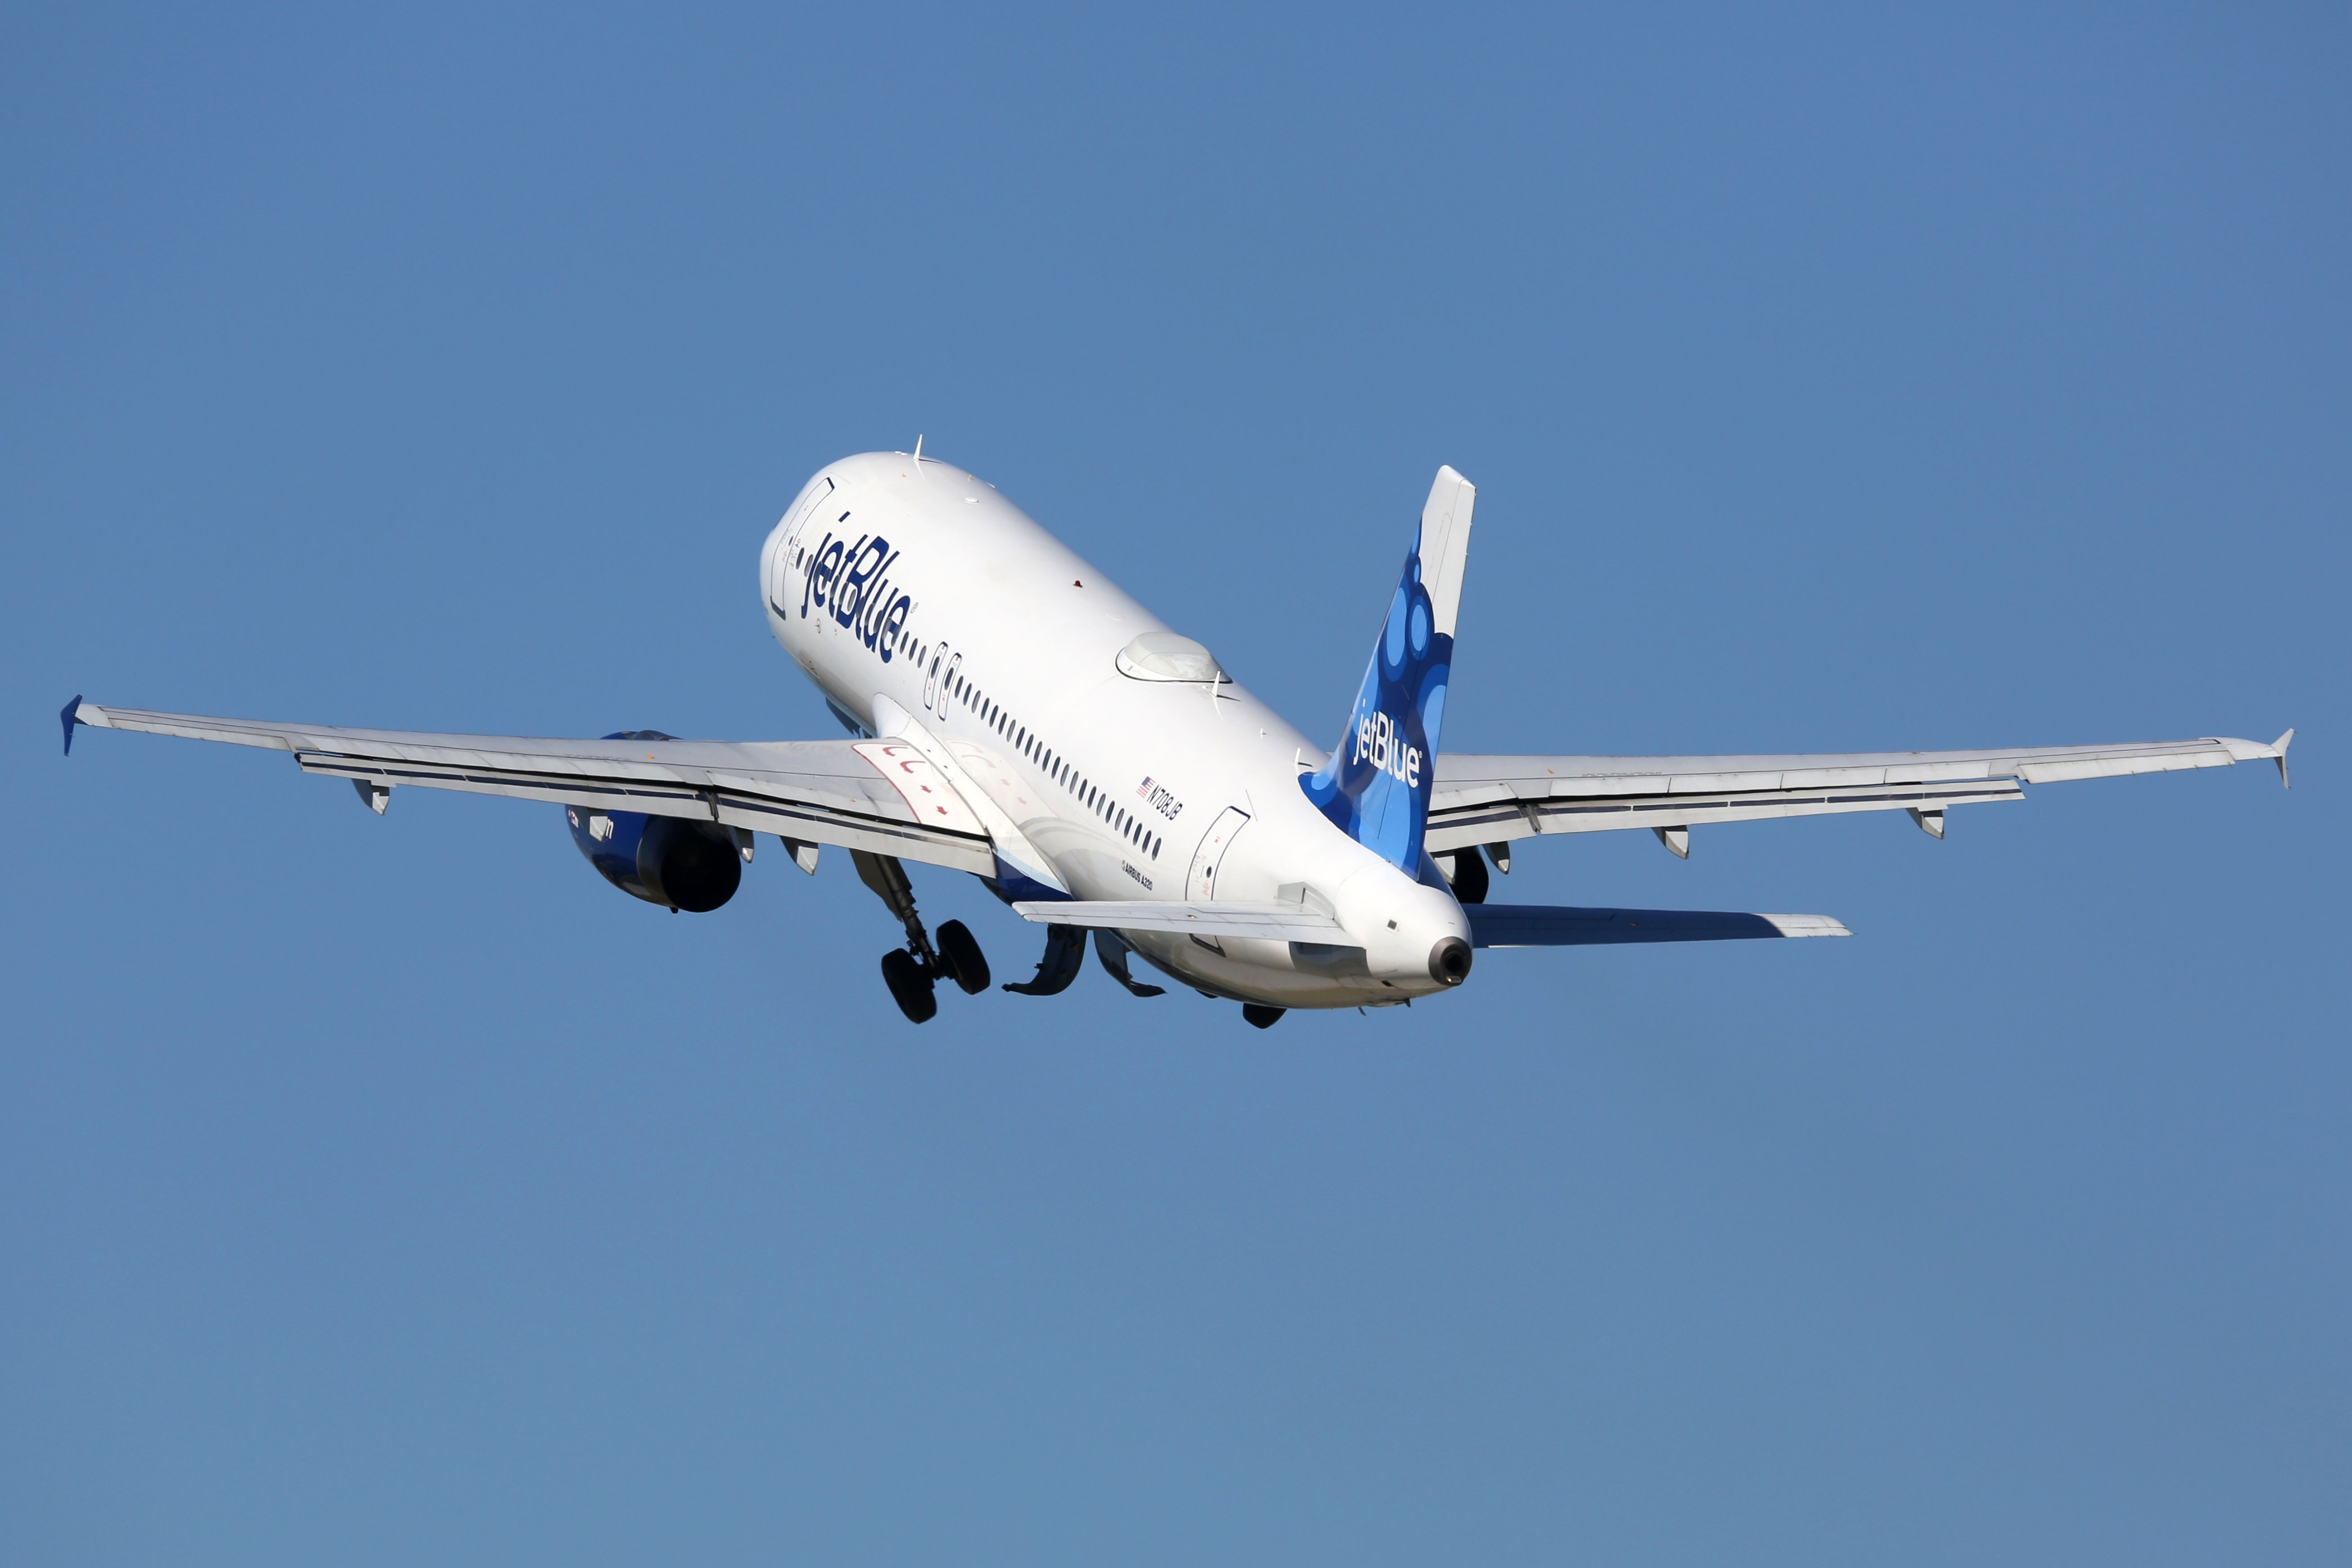 A JetBlue aircraft taking off